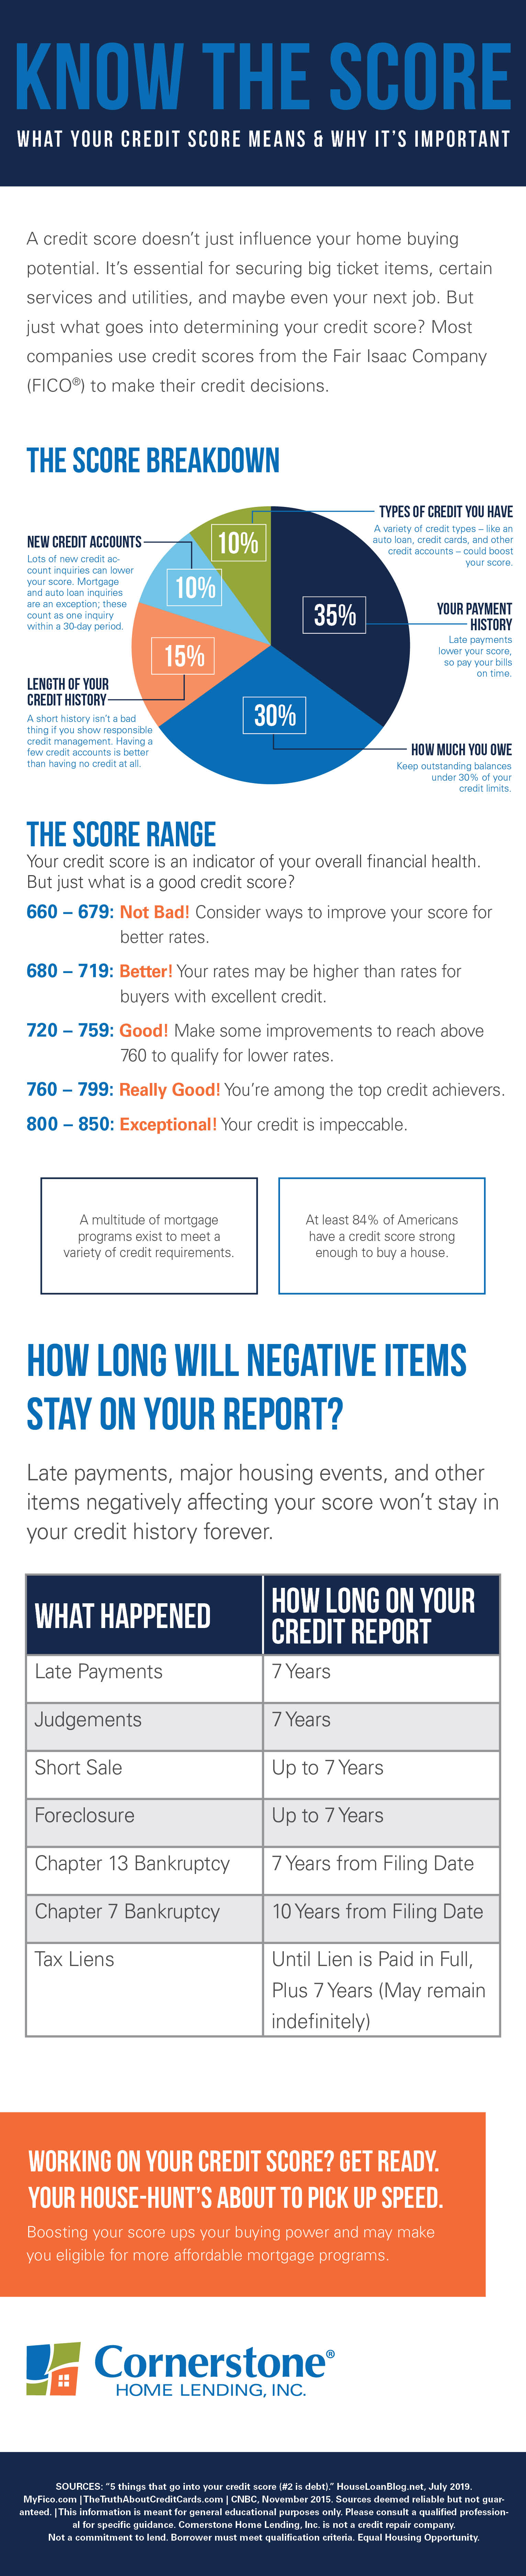 How Is My Credit Score Calculated Cornerstone Blog